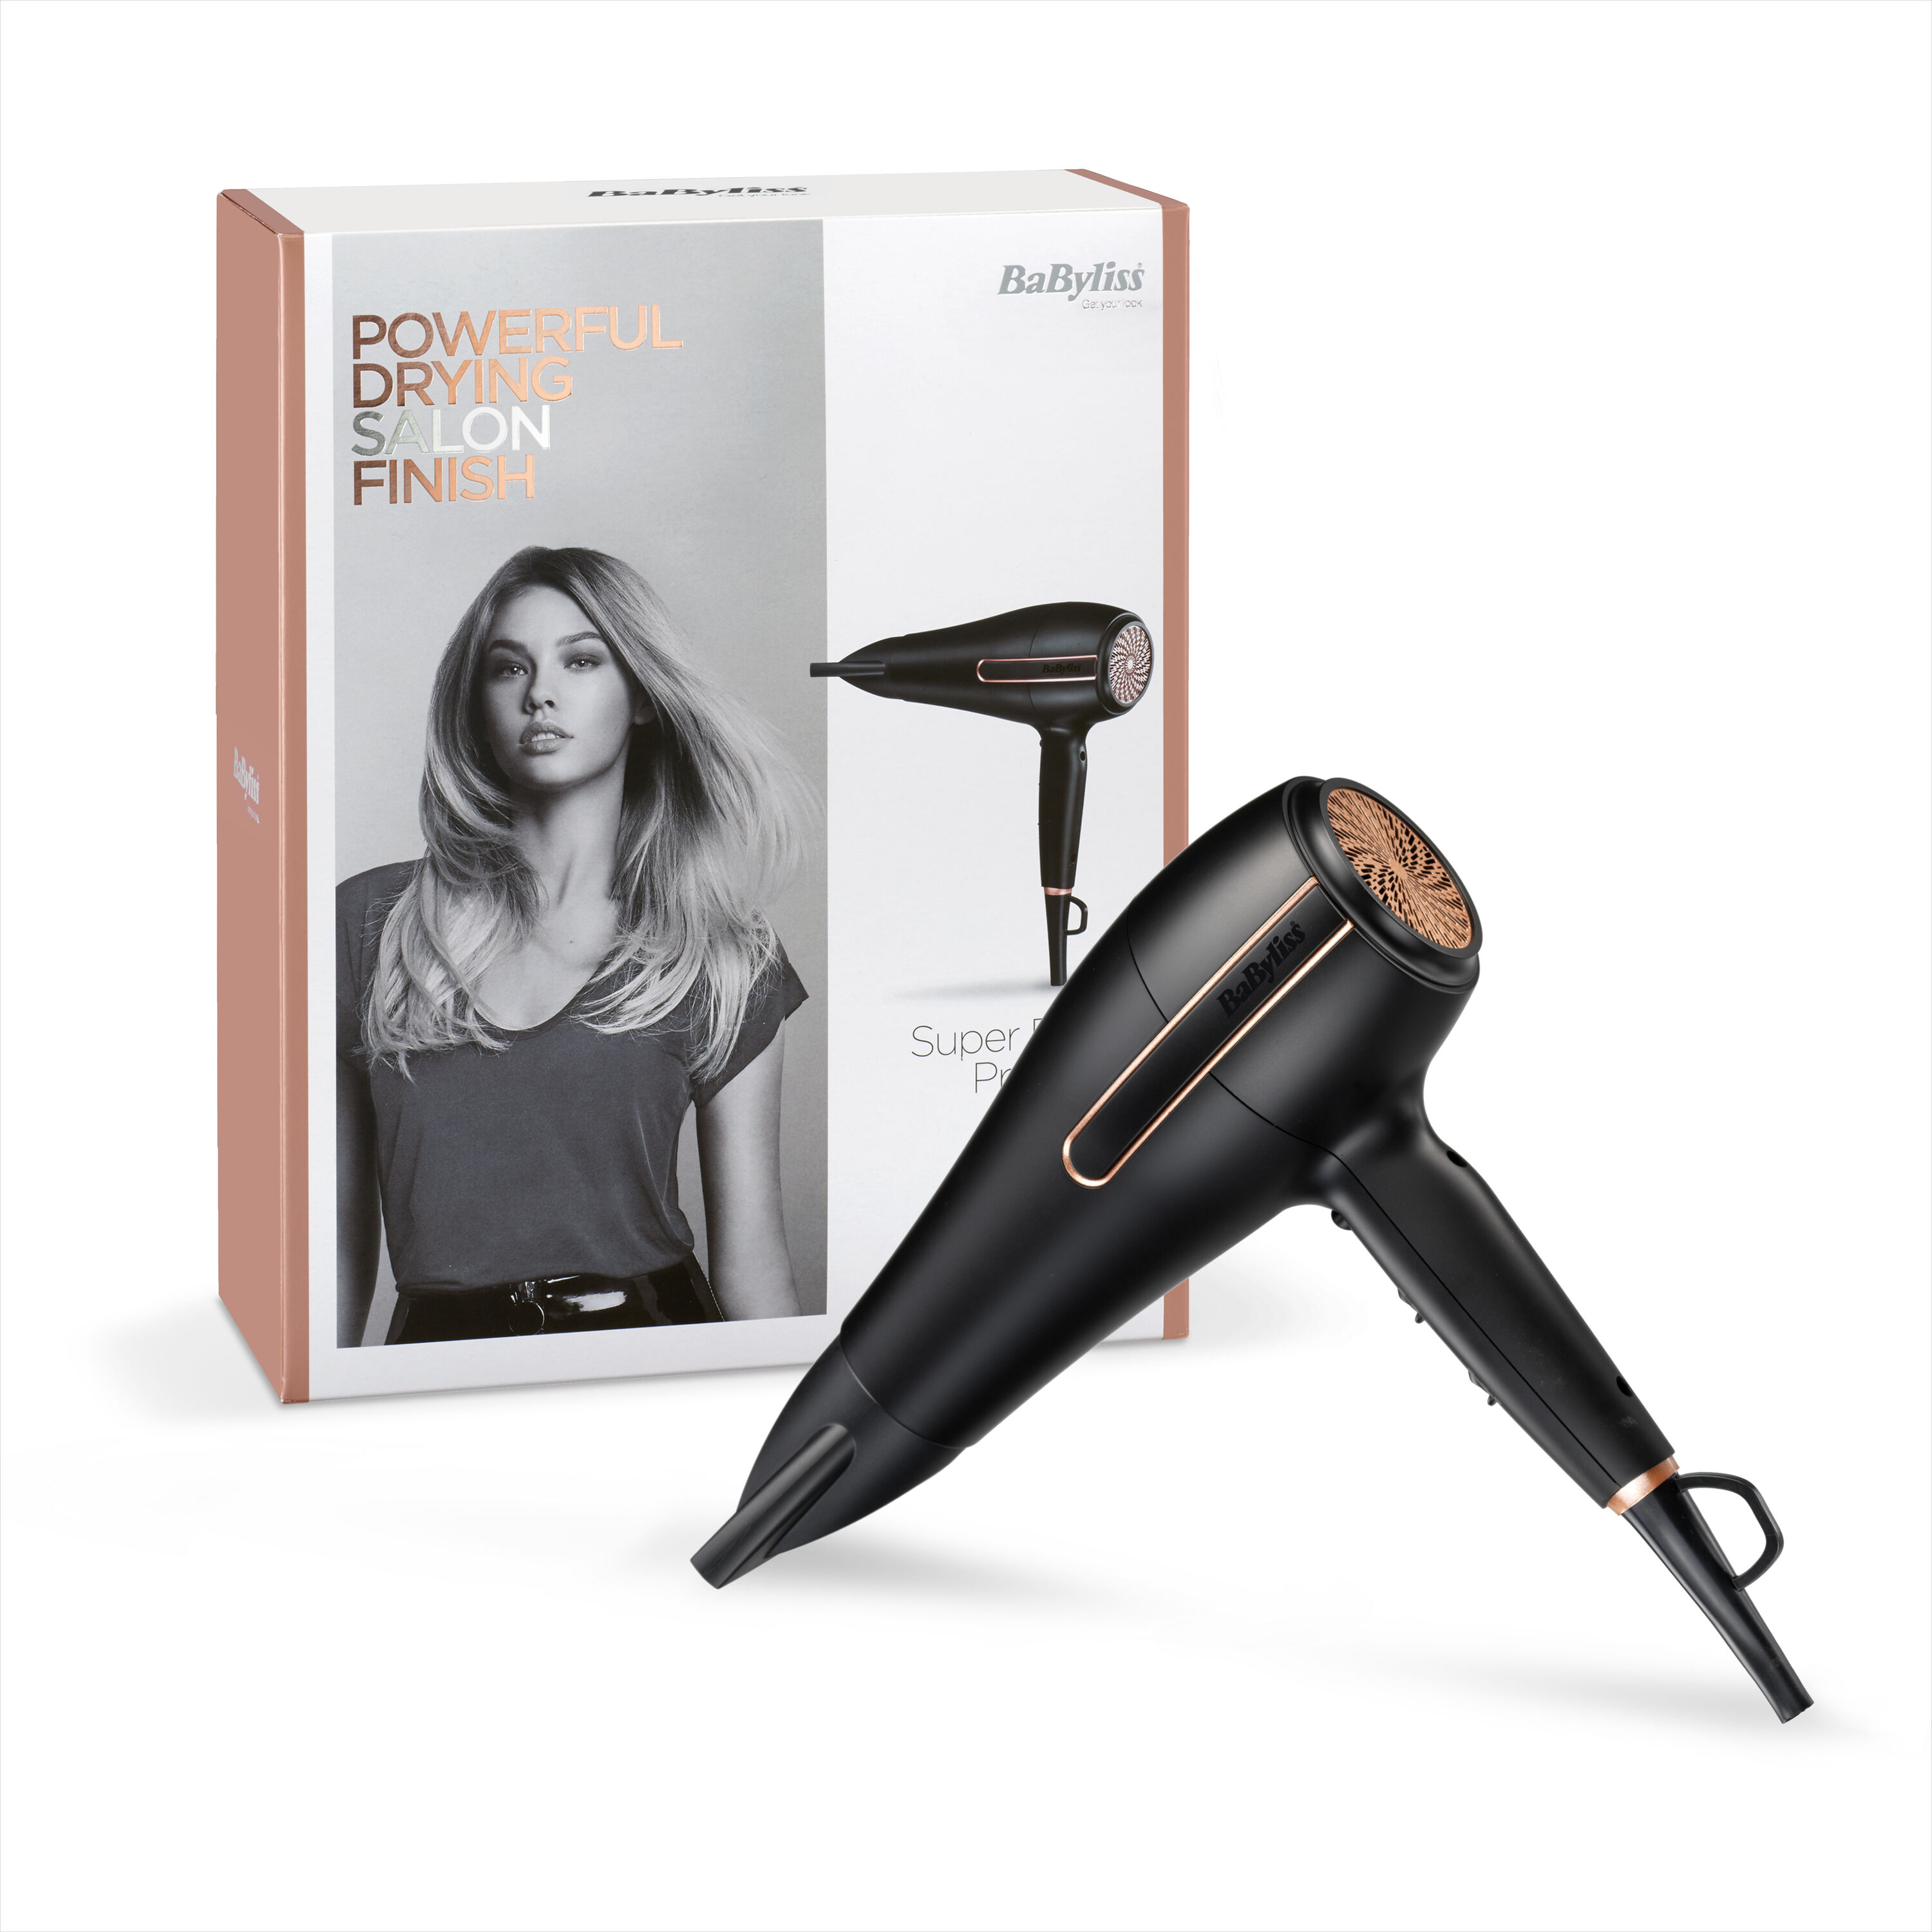 can trimmer be used for hair cutting